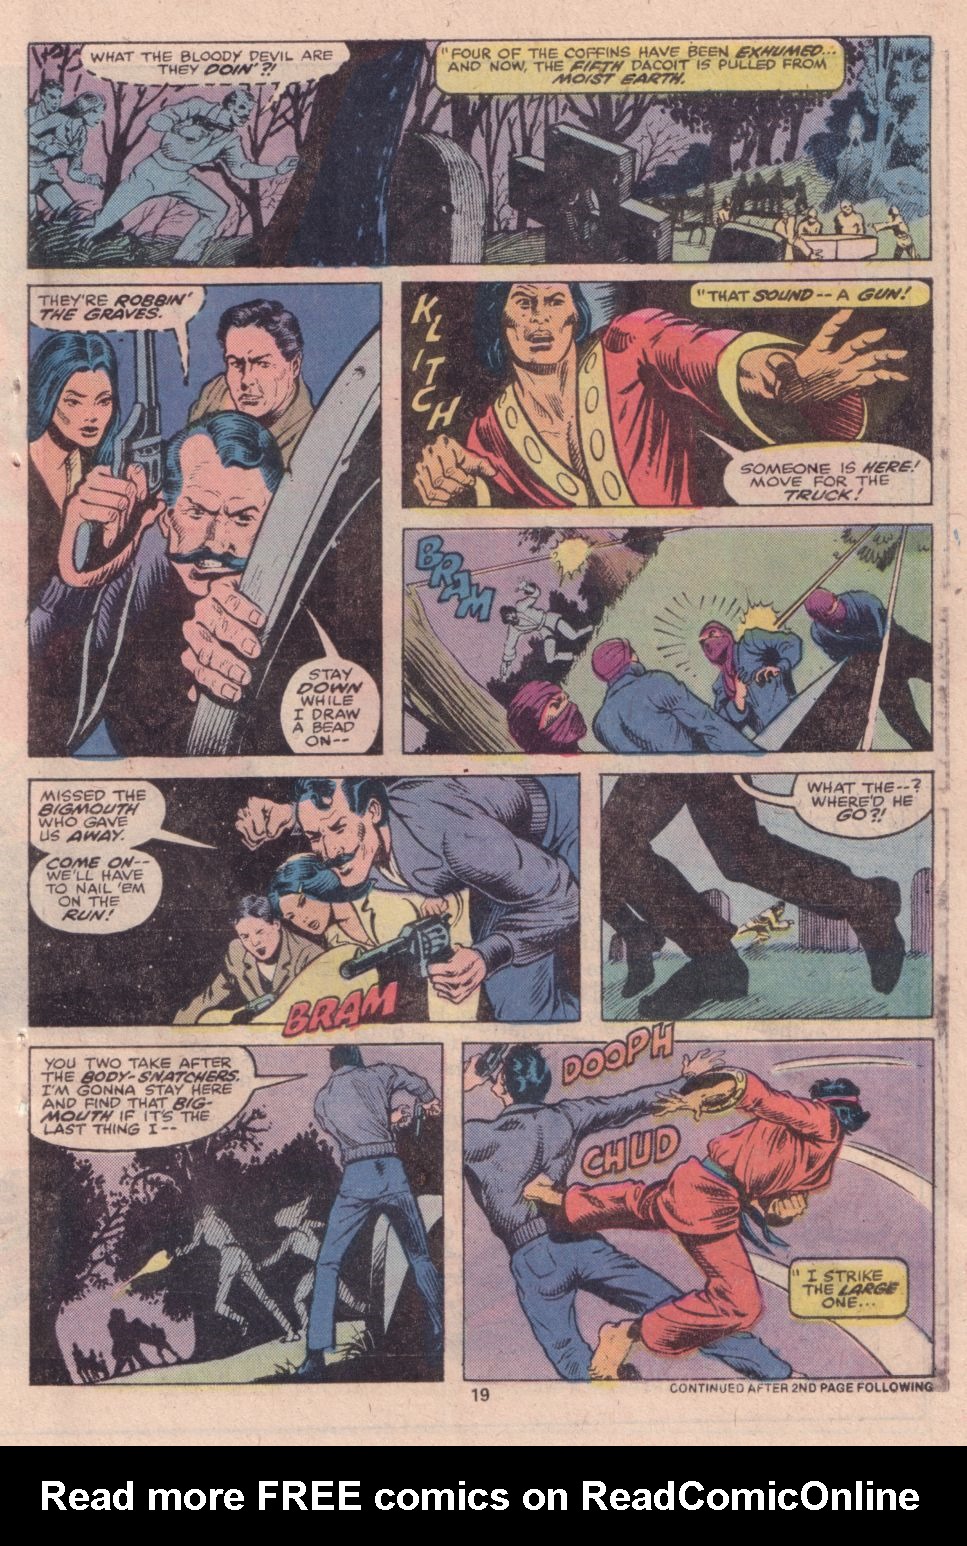 What If? (1977) Issue #16 - Shang Chi Master of Kung Fu fought on The side of Fu Manchu #16 - English 16